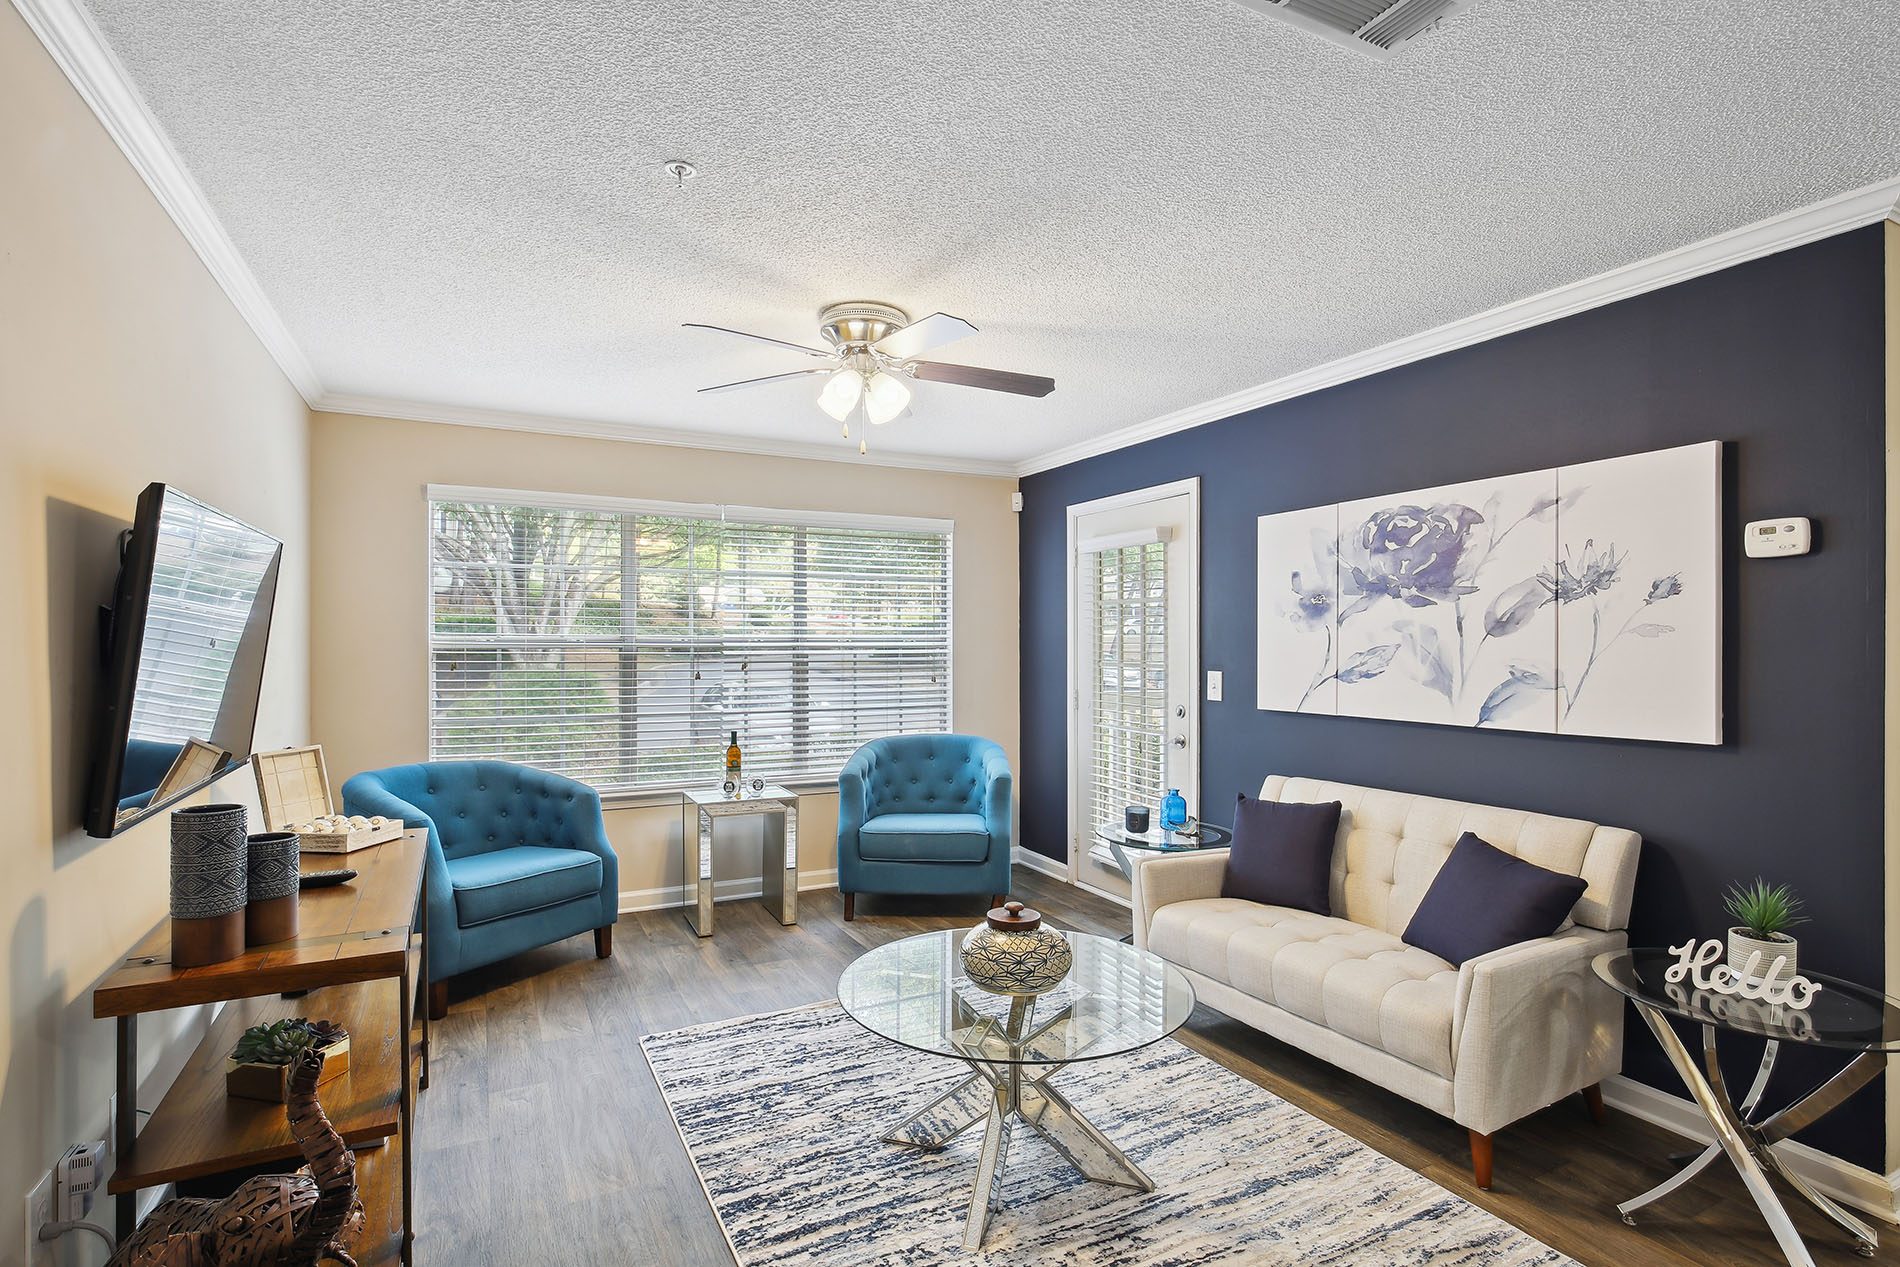 a living room with blue and white furniture and a ceiling fan